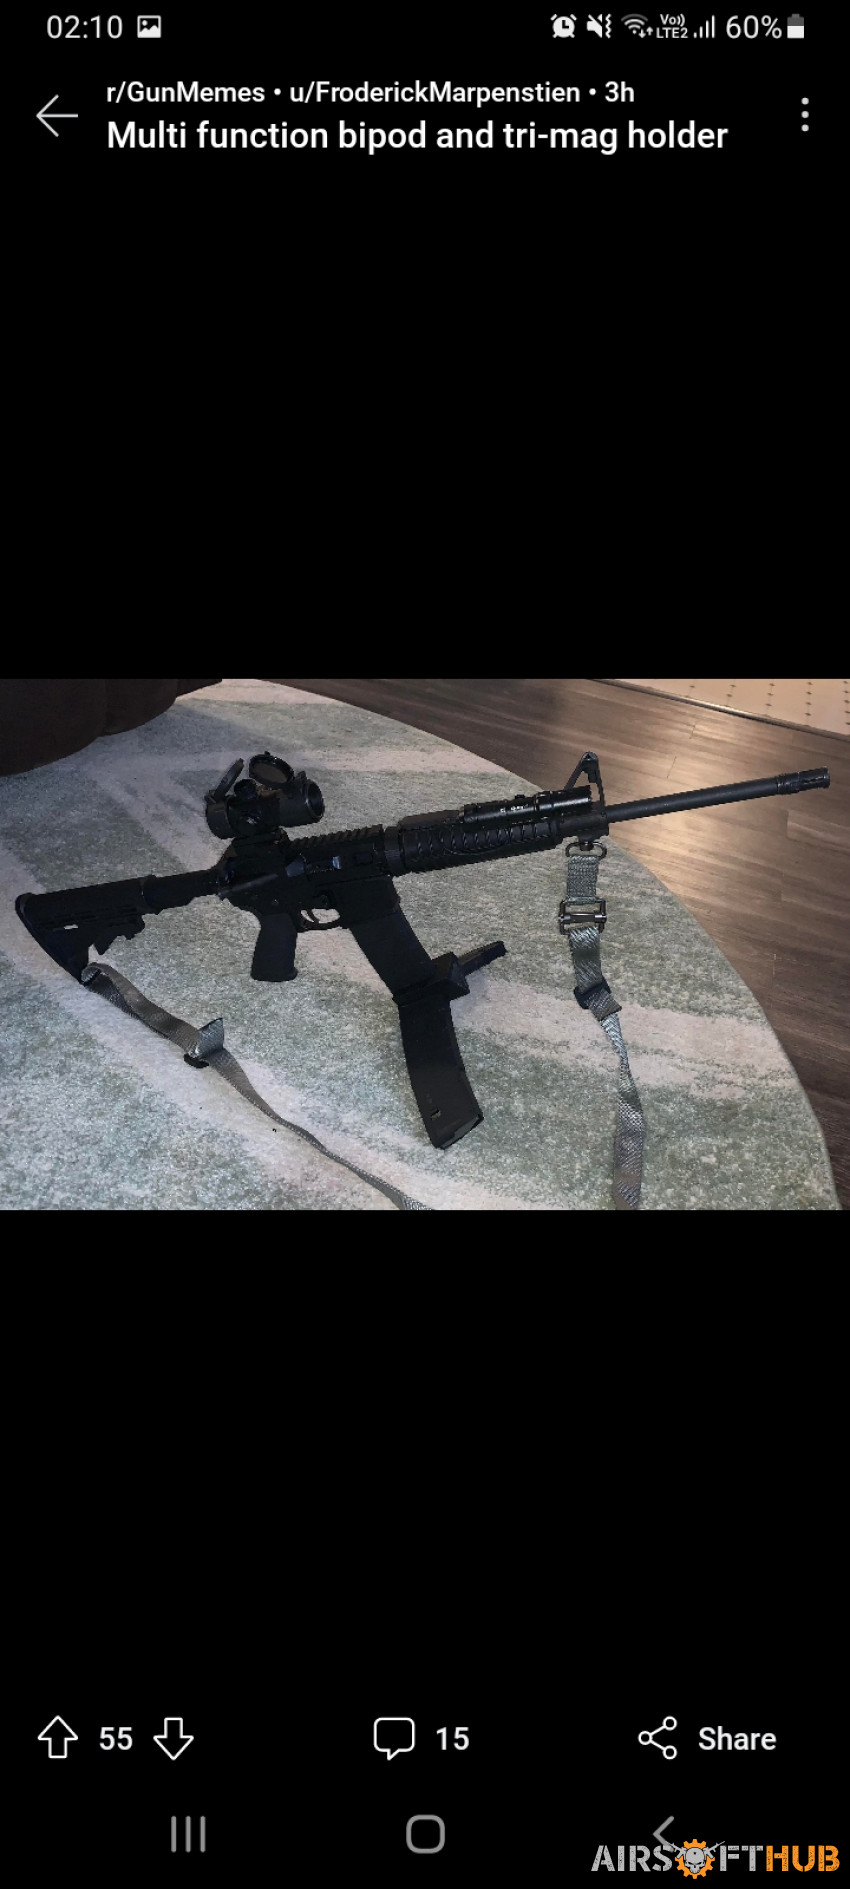 Gbbr wanted, look at desc. - Used airsoft equipment